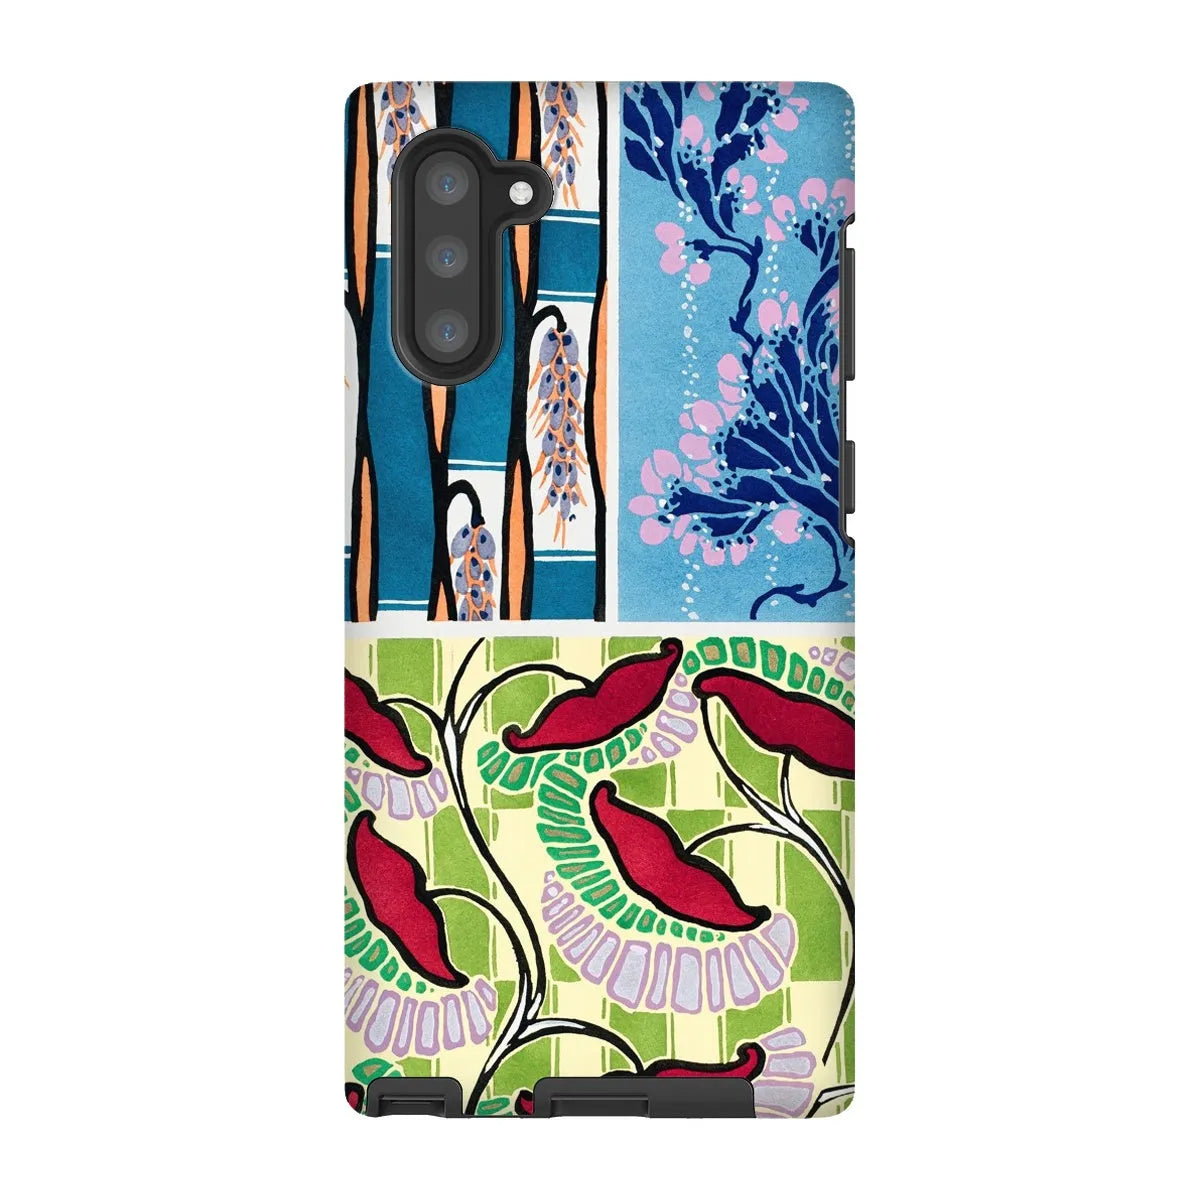 Floral Kitsch Aesthetic Art Phone Case - E.a. Séguy - Samsung Galaxy Note 10 / Matte - Mobile Phone Cases - Aesthetic